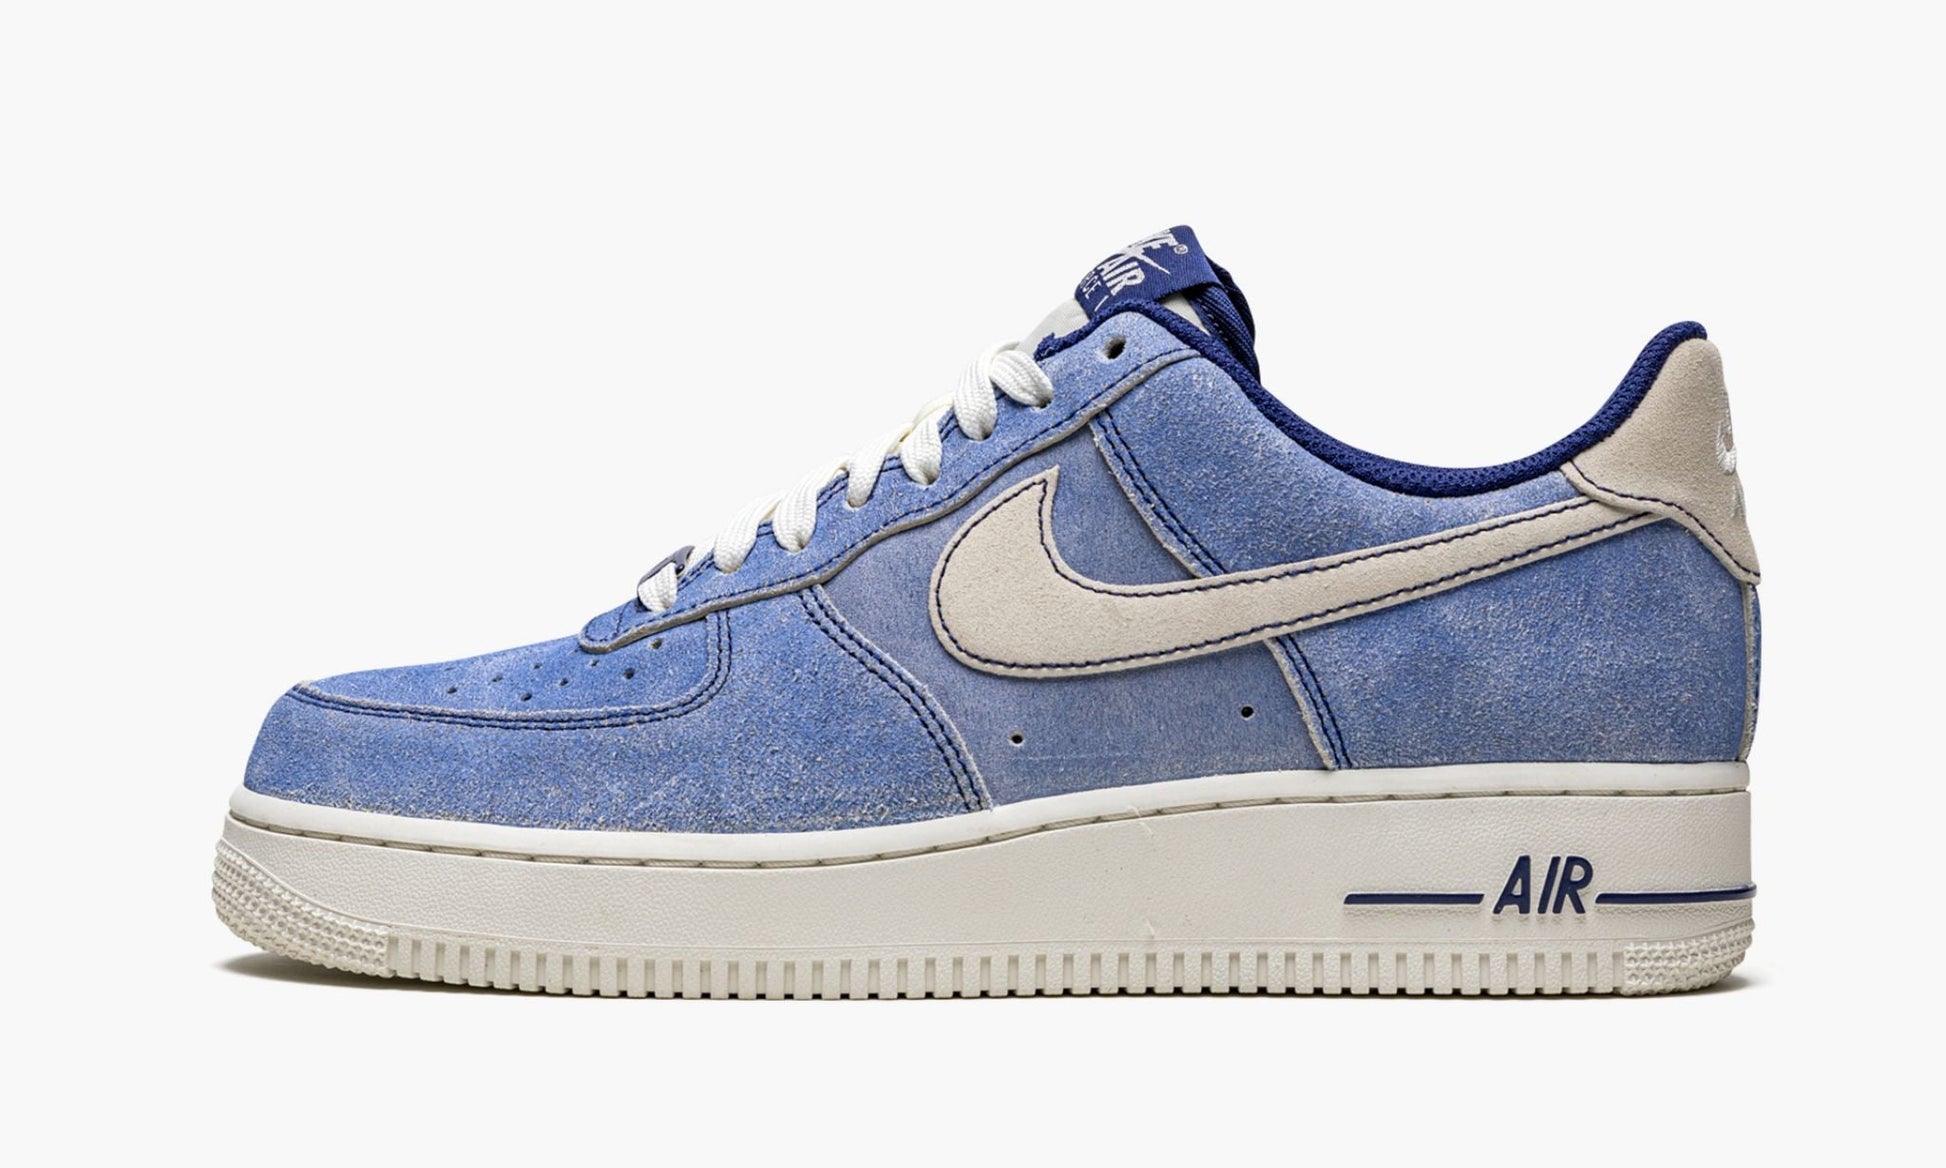 Air Force 1 Low '07 LV8 "Dusty Blue"